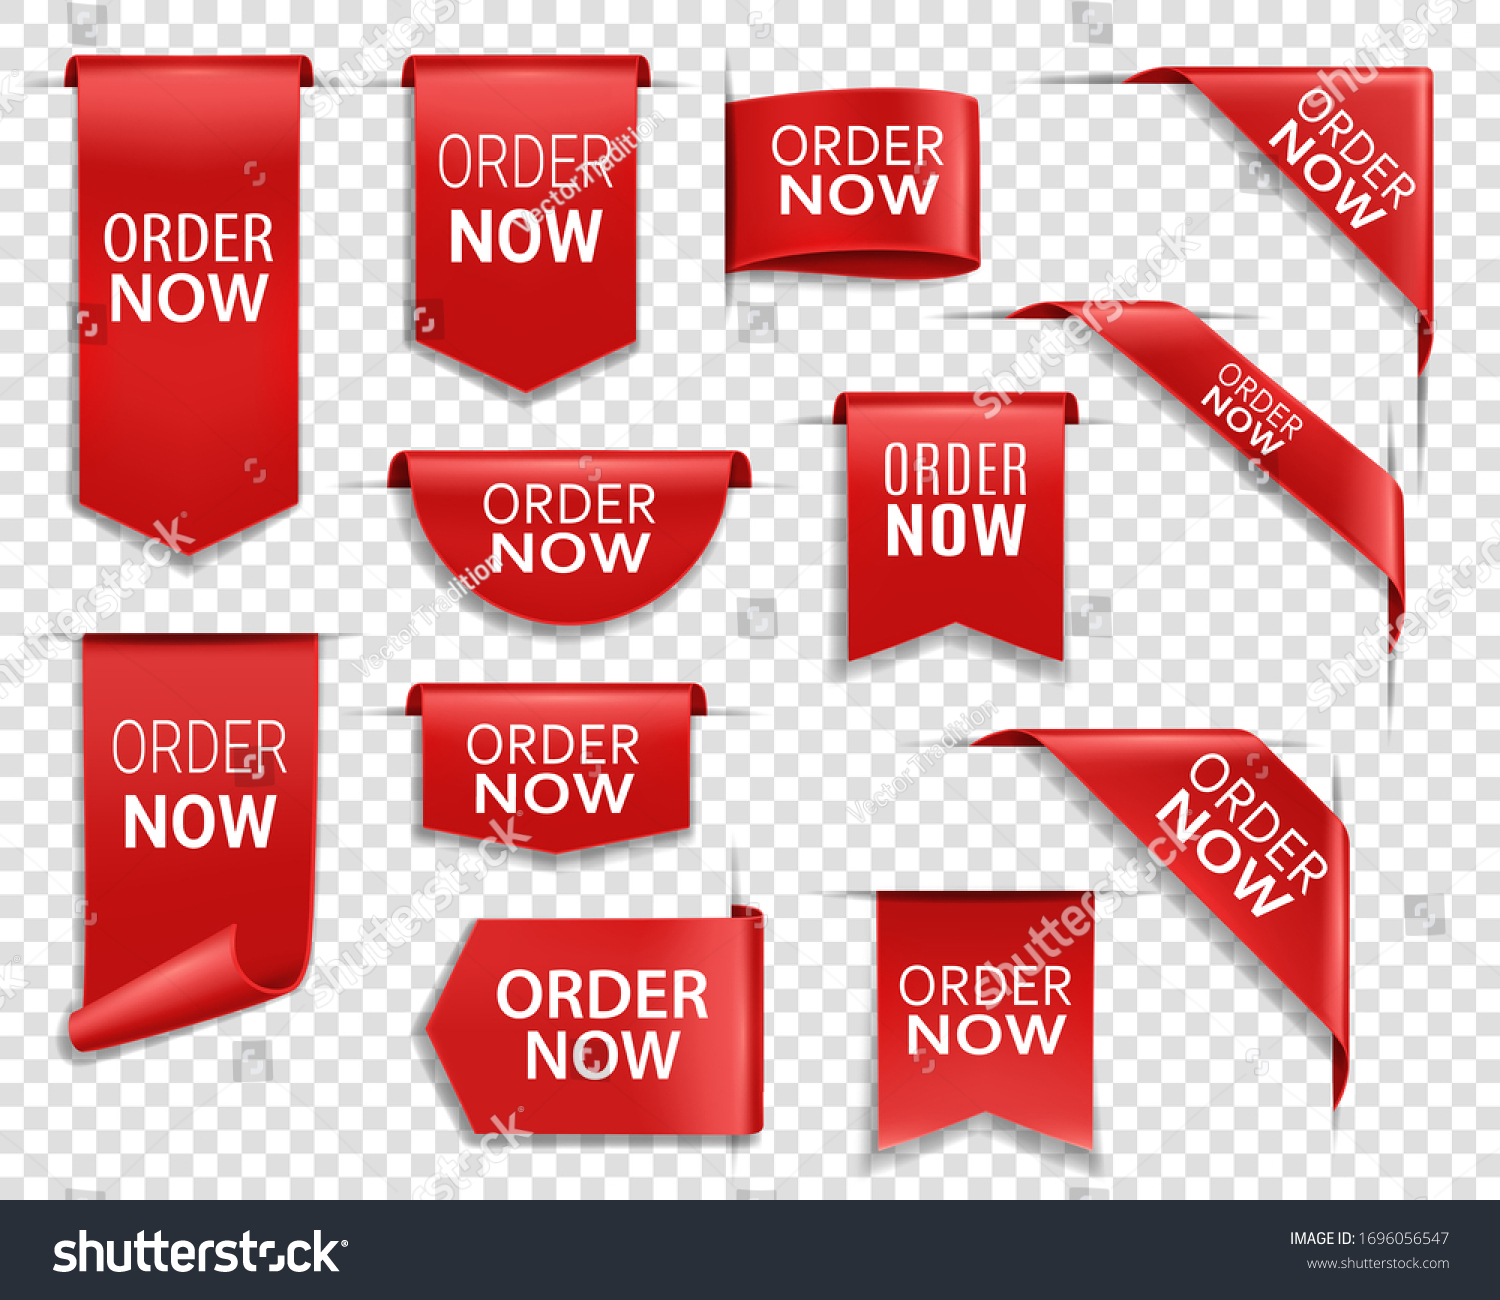 Order now red ribbons, online shopping web banners. Order now icons of corner bookmarks, tags, flags and curved ribbons of red silk #1696056547